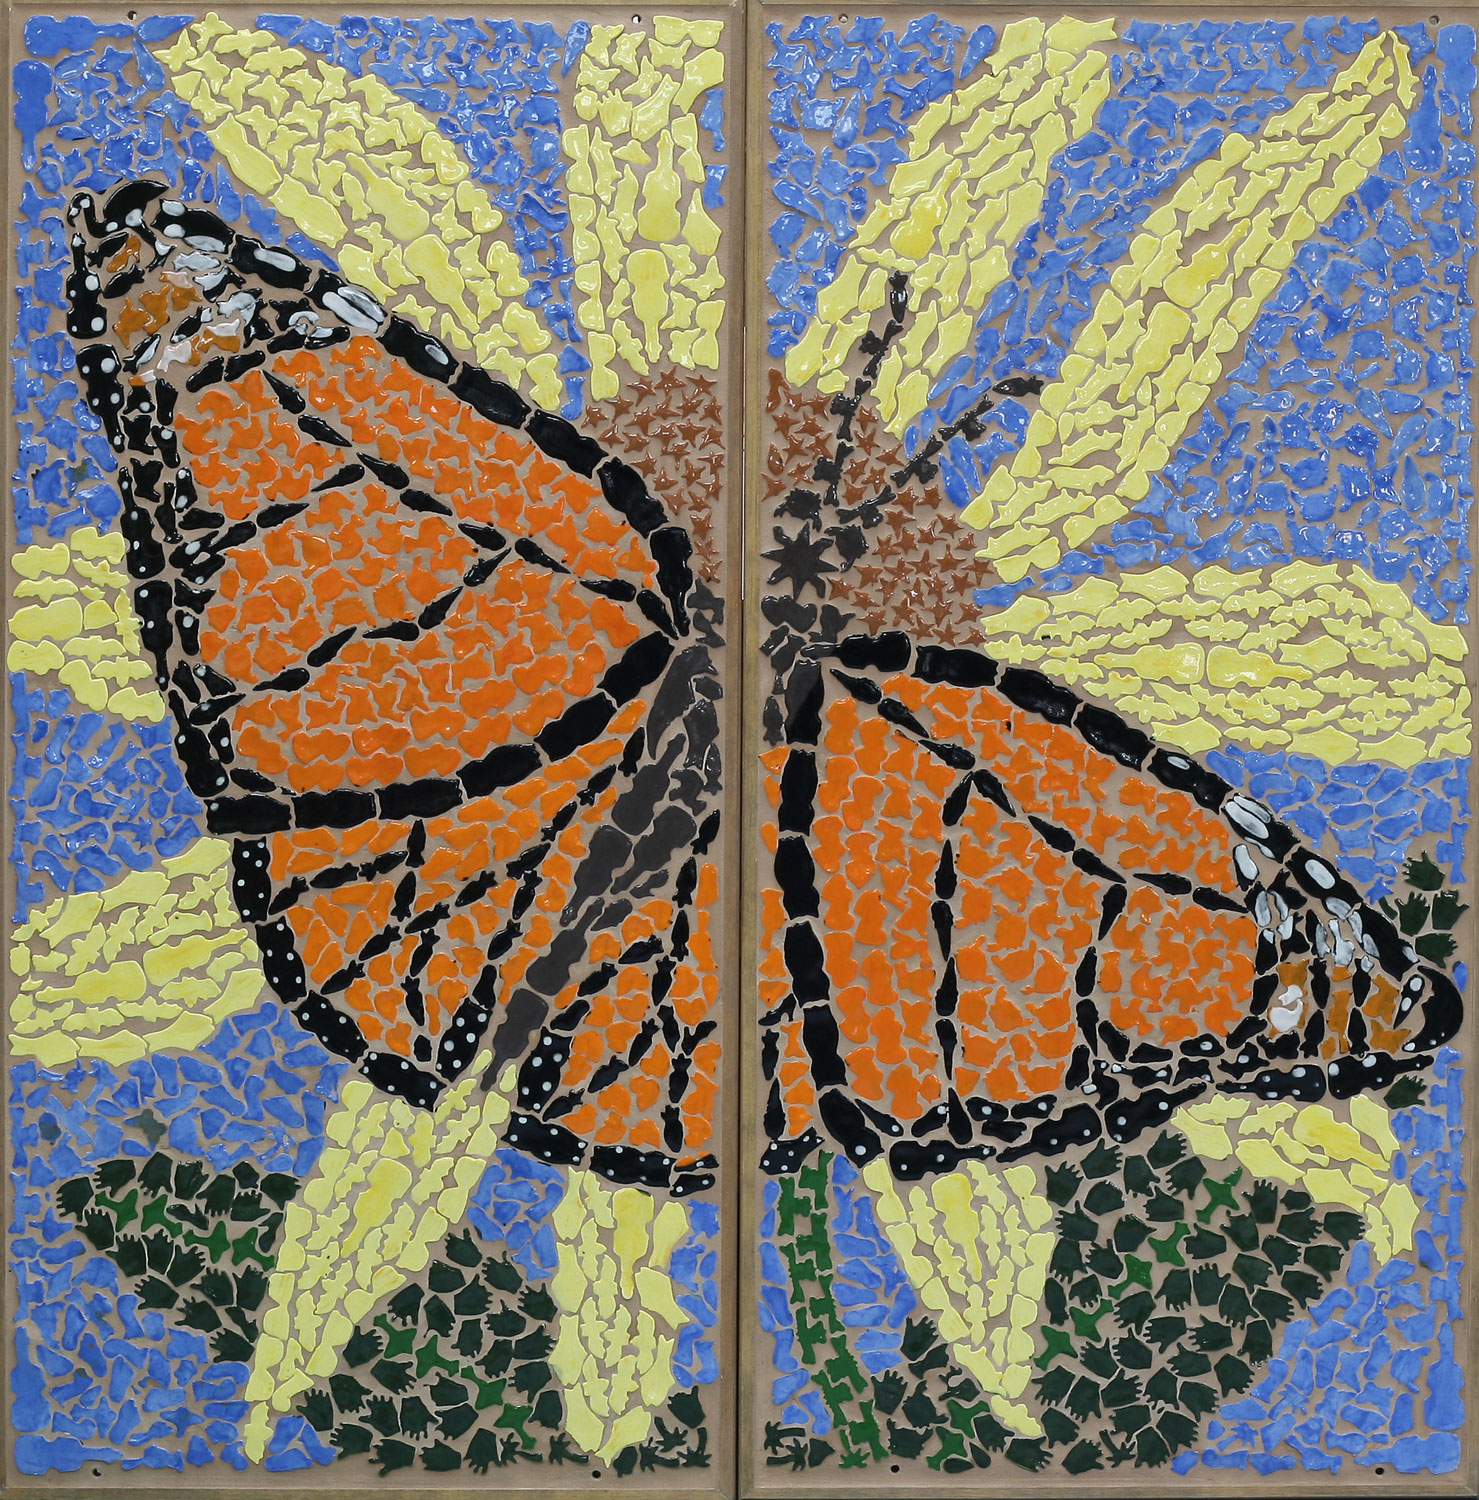 a two panel mosaic made with students from St. James the Greater in Cincinnati